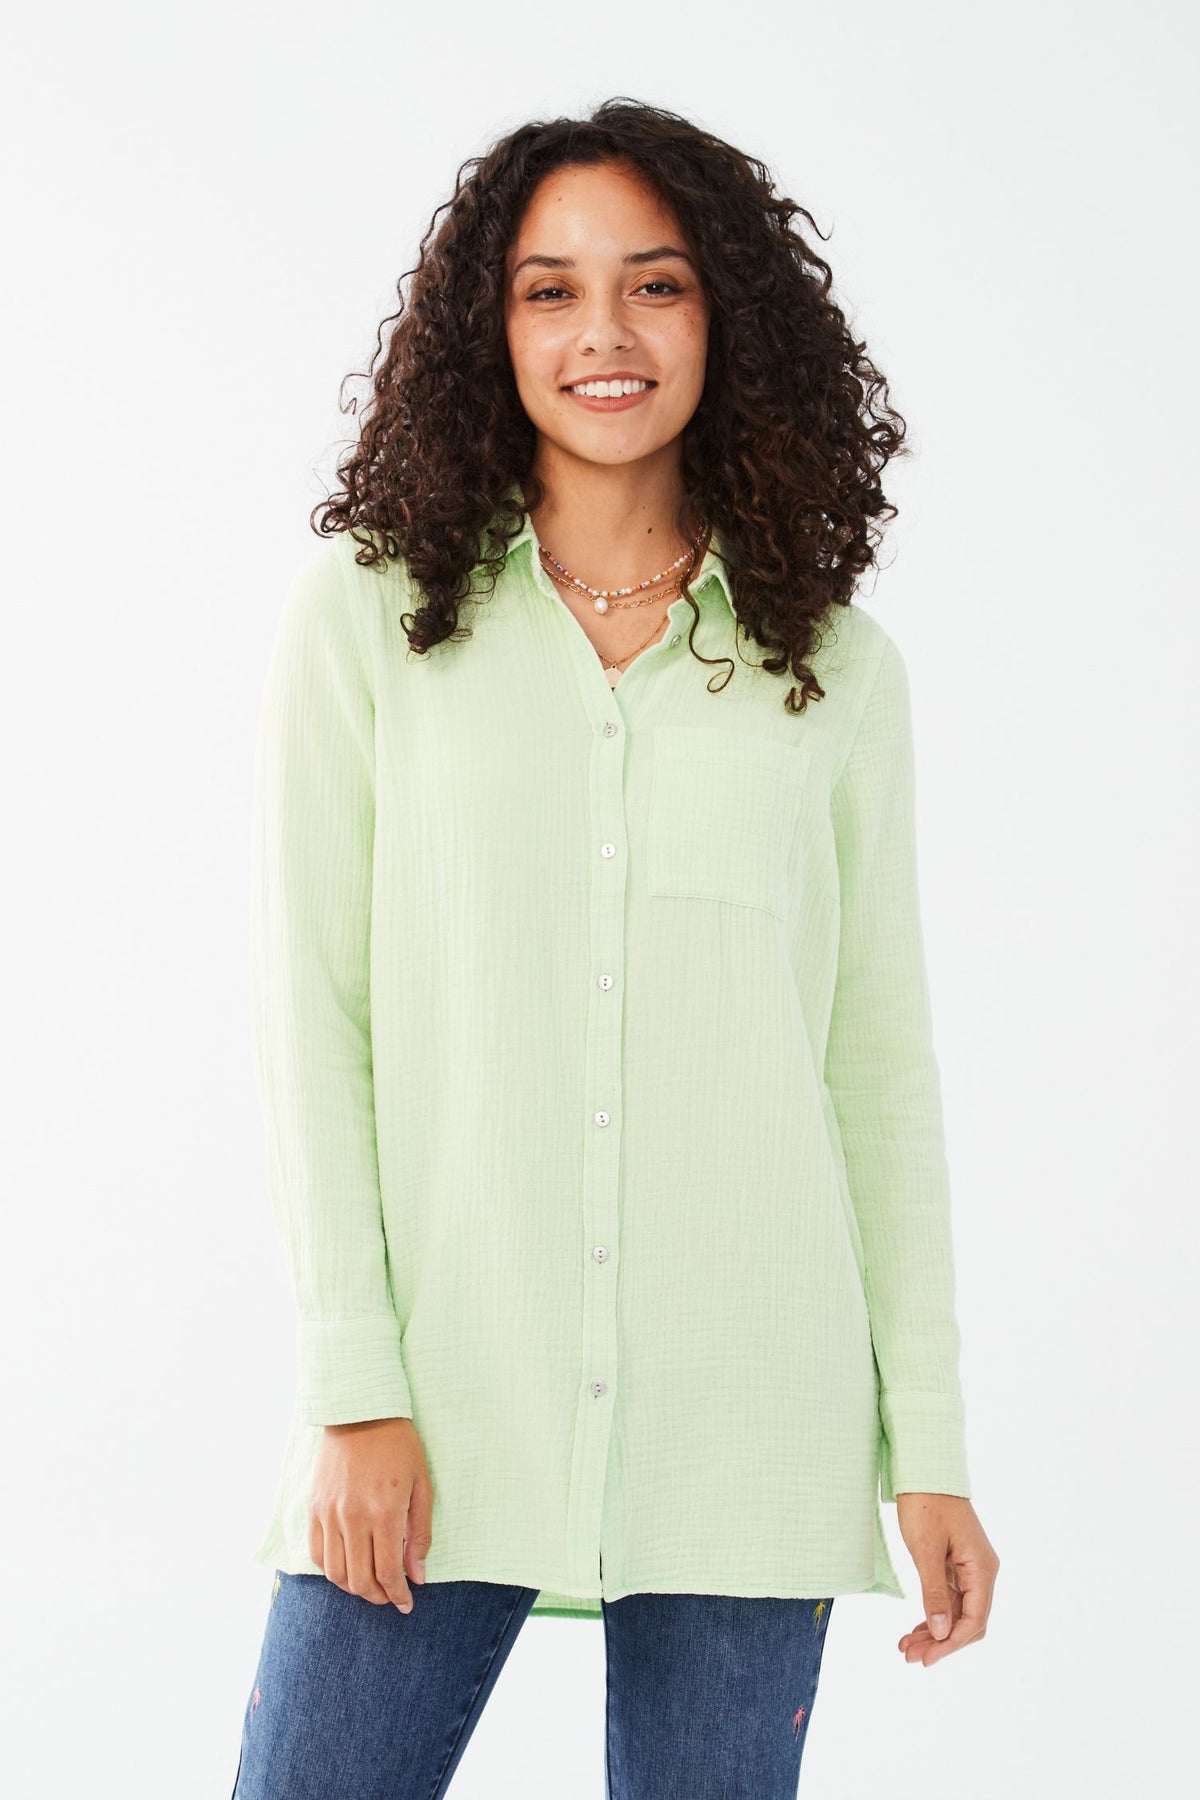 FDJ Long Sleeve Crinkle Cotton Tunic - Style 7122975F, front, green